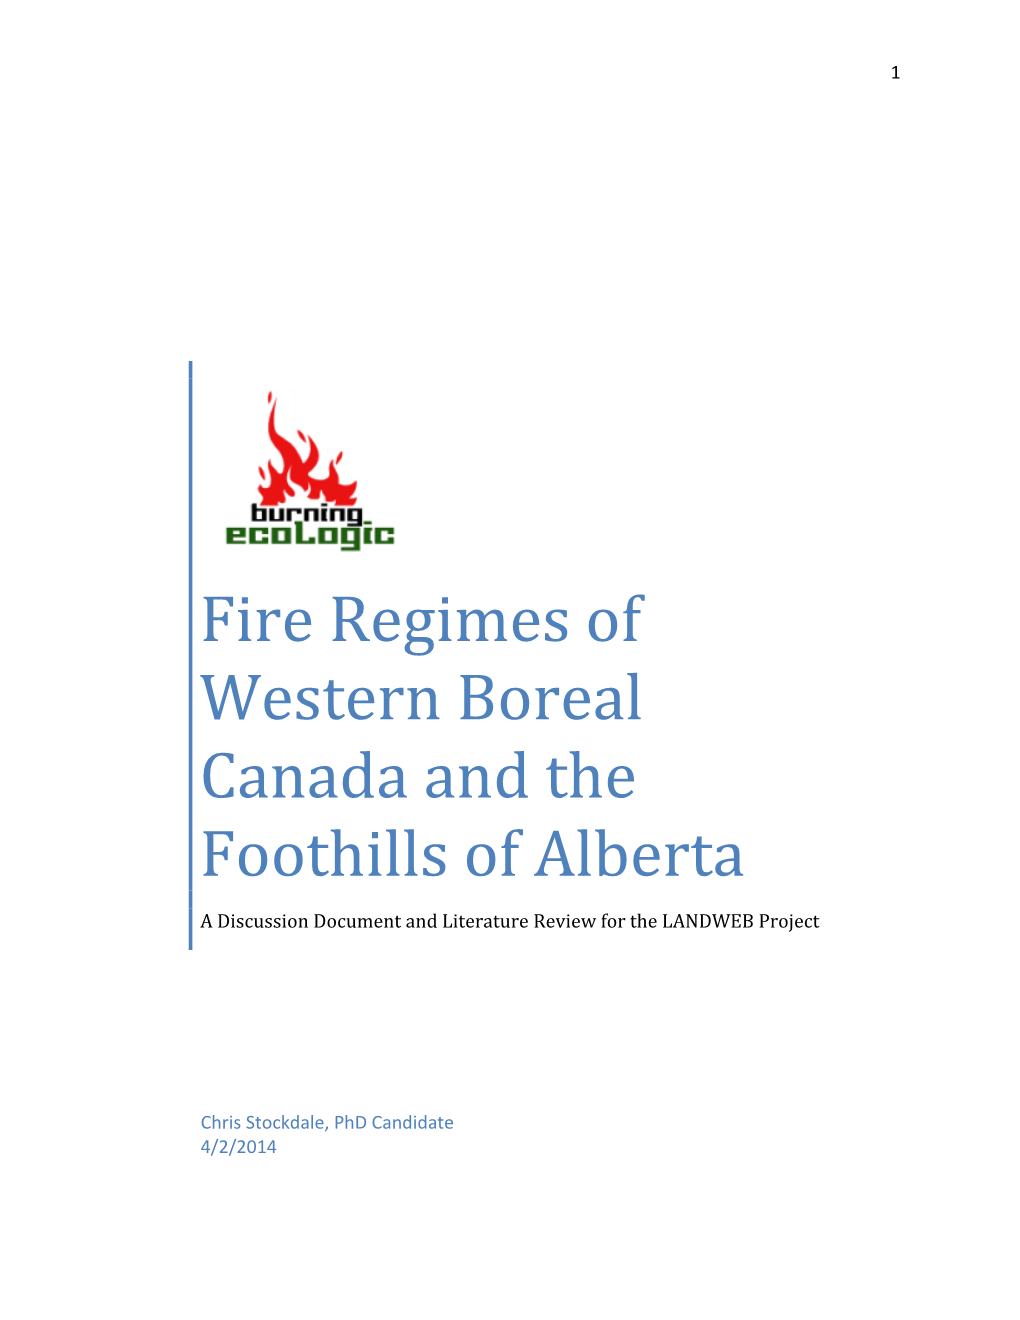 Fire Regimes of Western Boreal Canada and the Foothills of Alberta